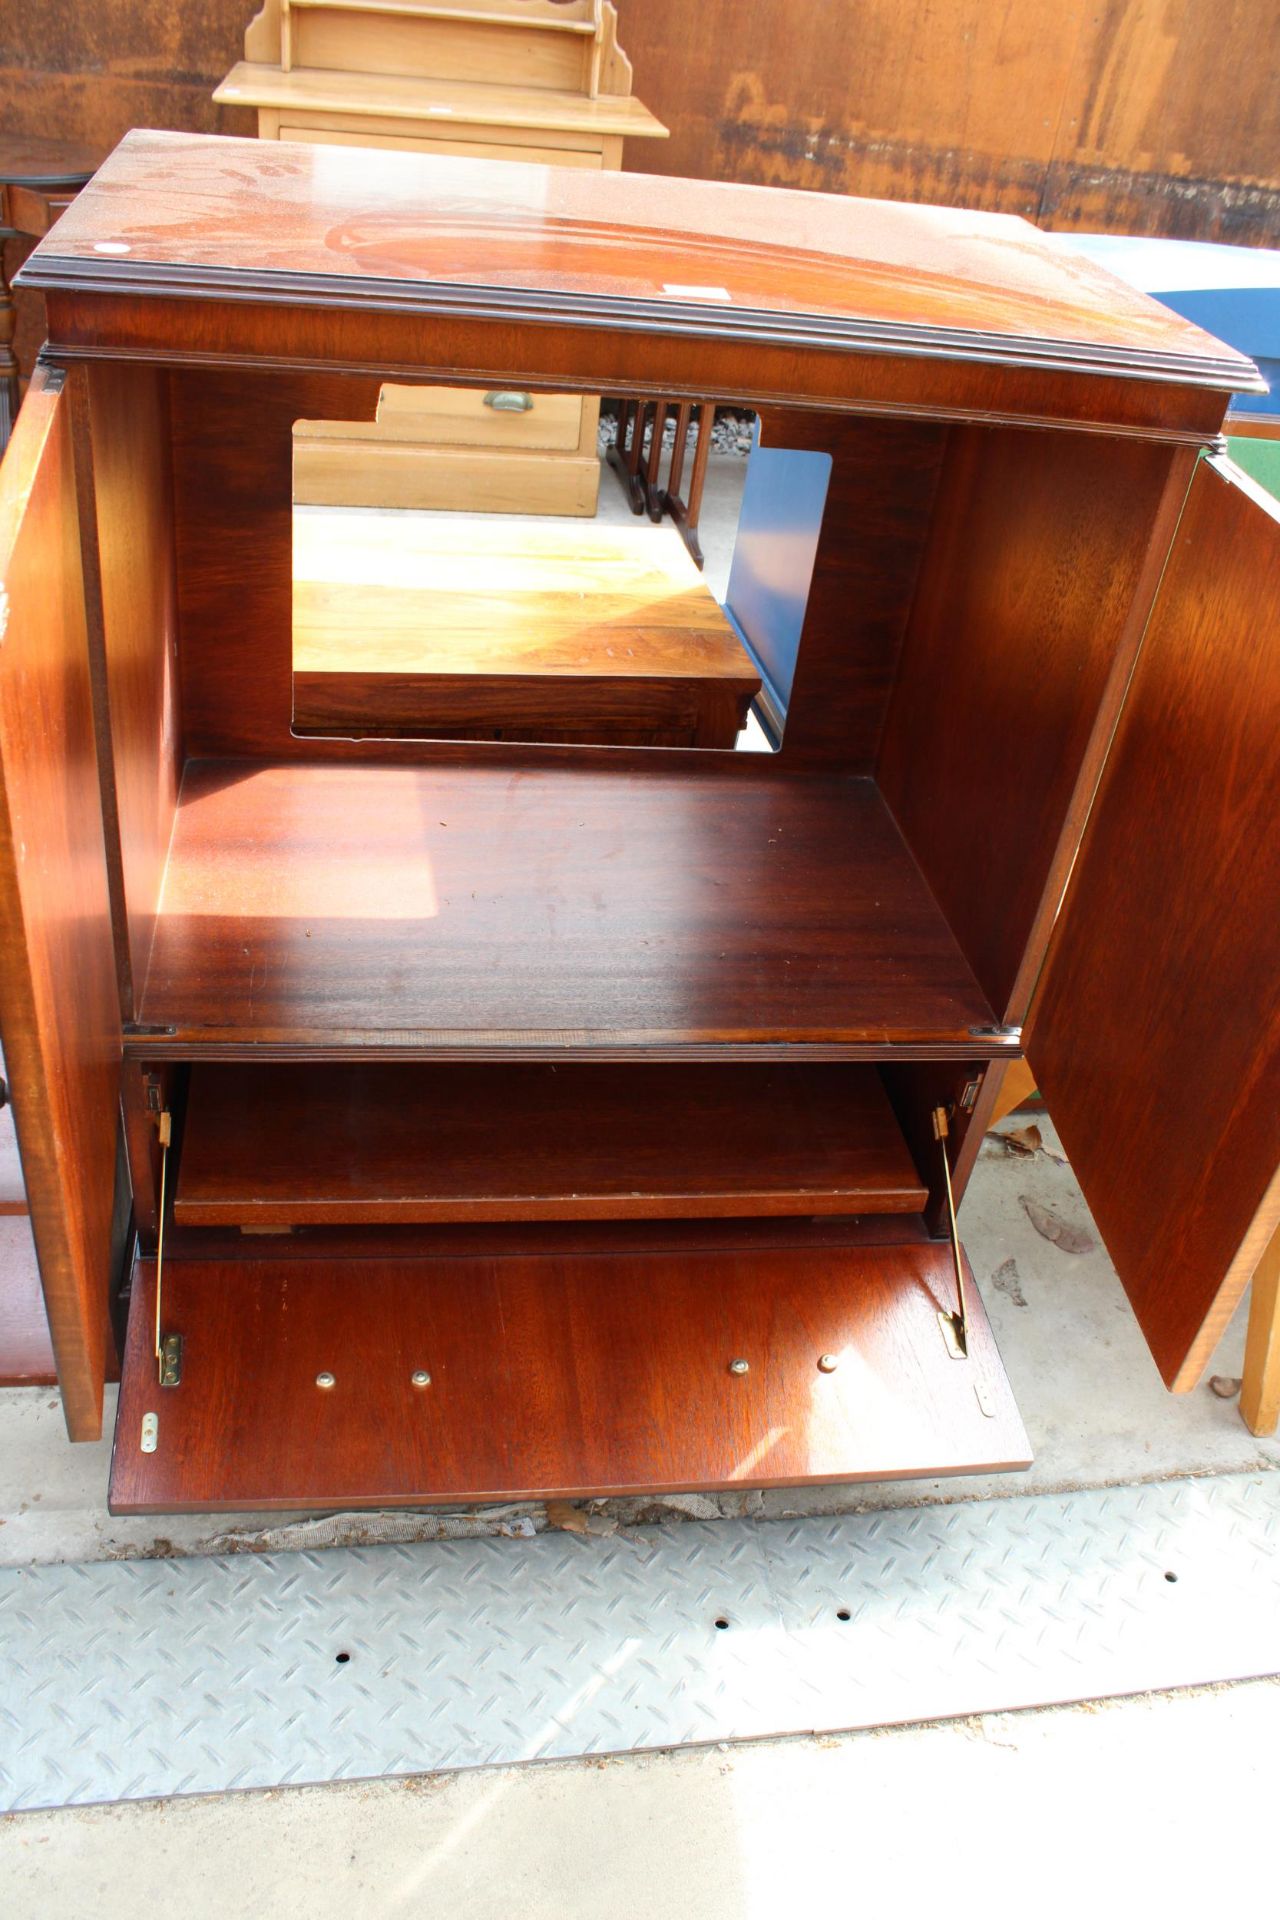 A MAHOGANY TWO DOOR T.V. CABINET - Image 2 of 3